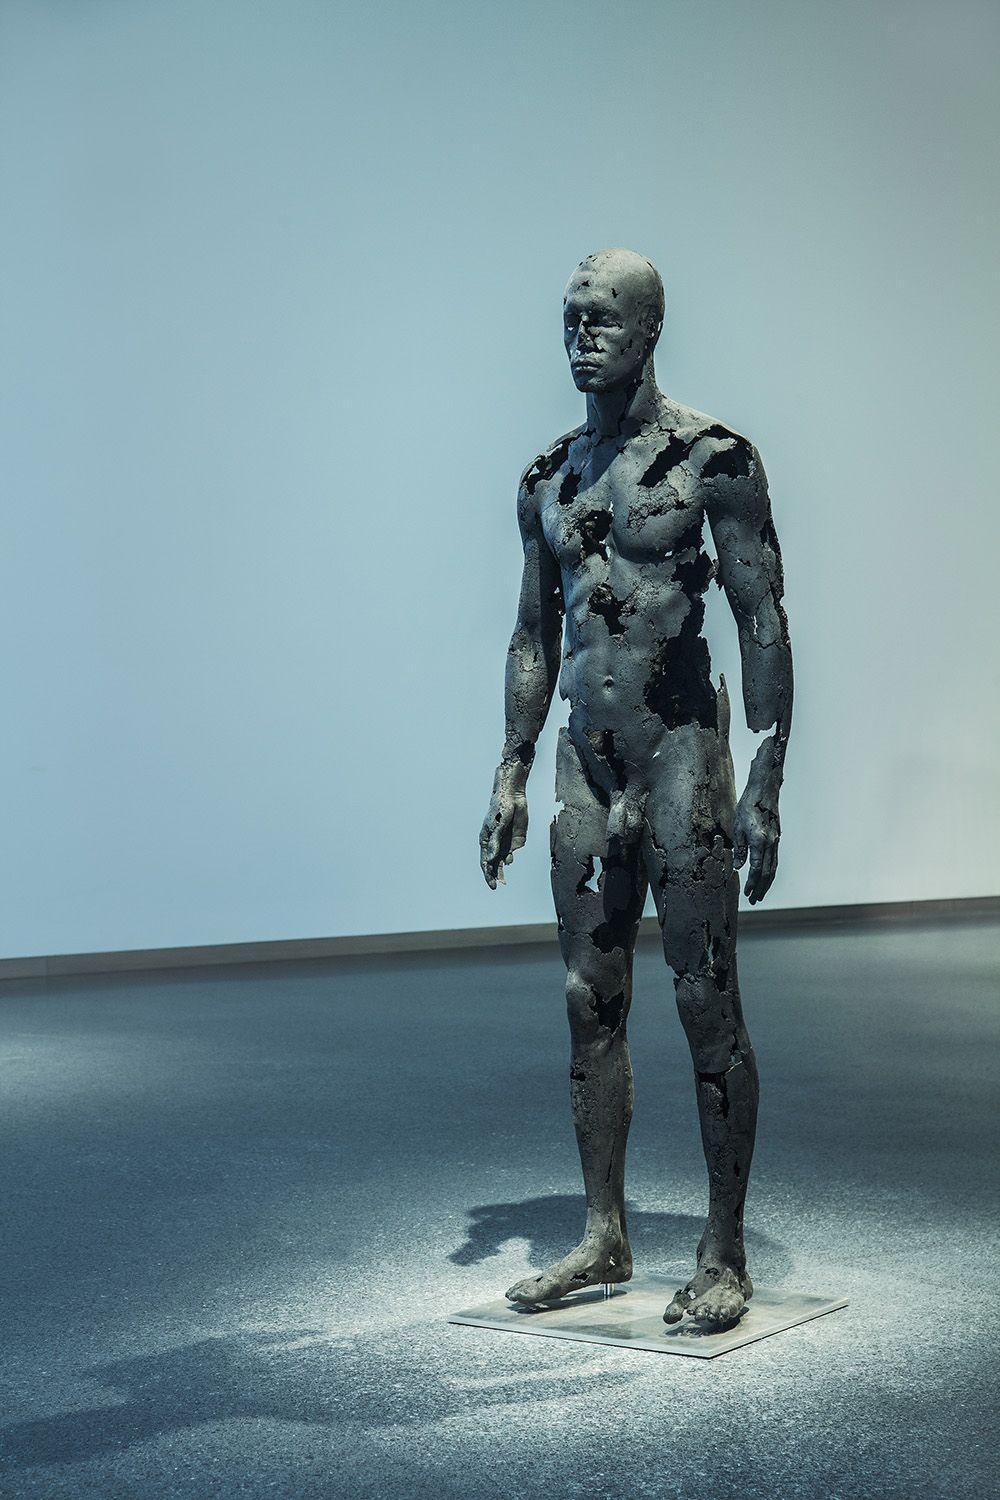 The Presence of Absence – Male (III) by Tom Price - Coal sculpture, nude body